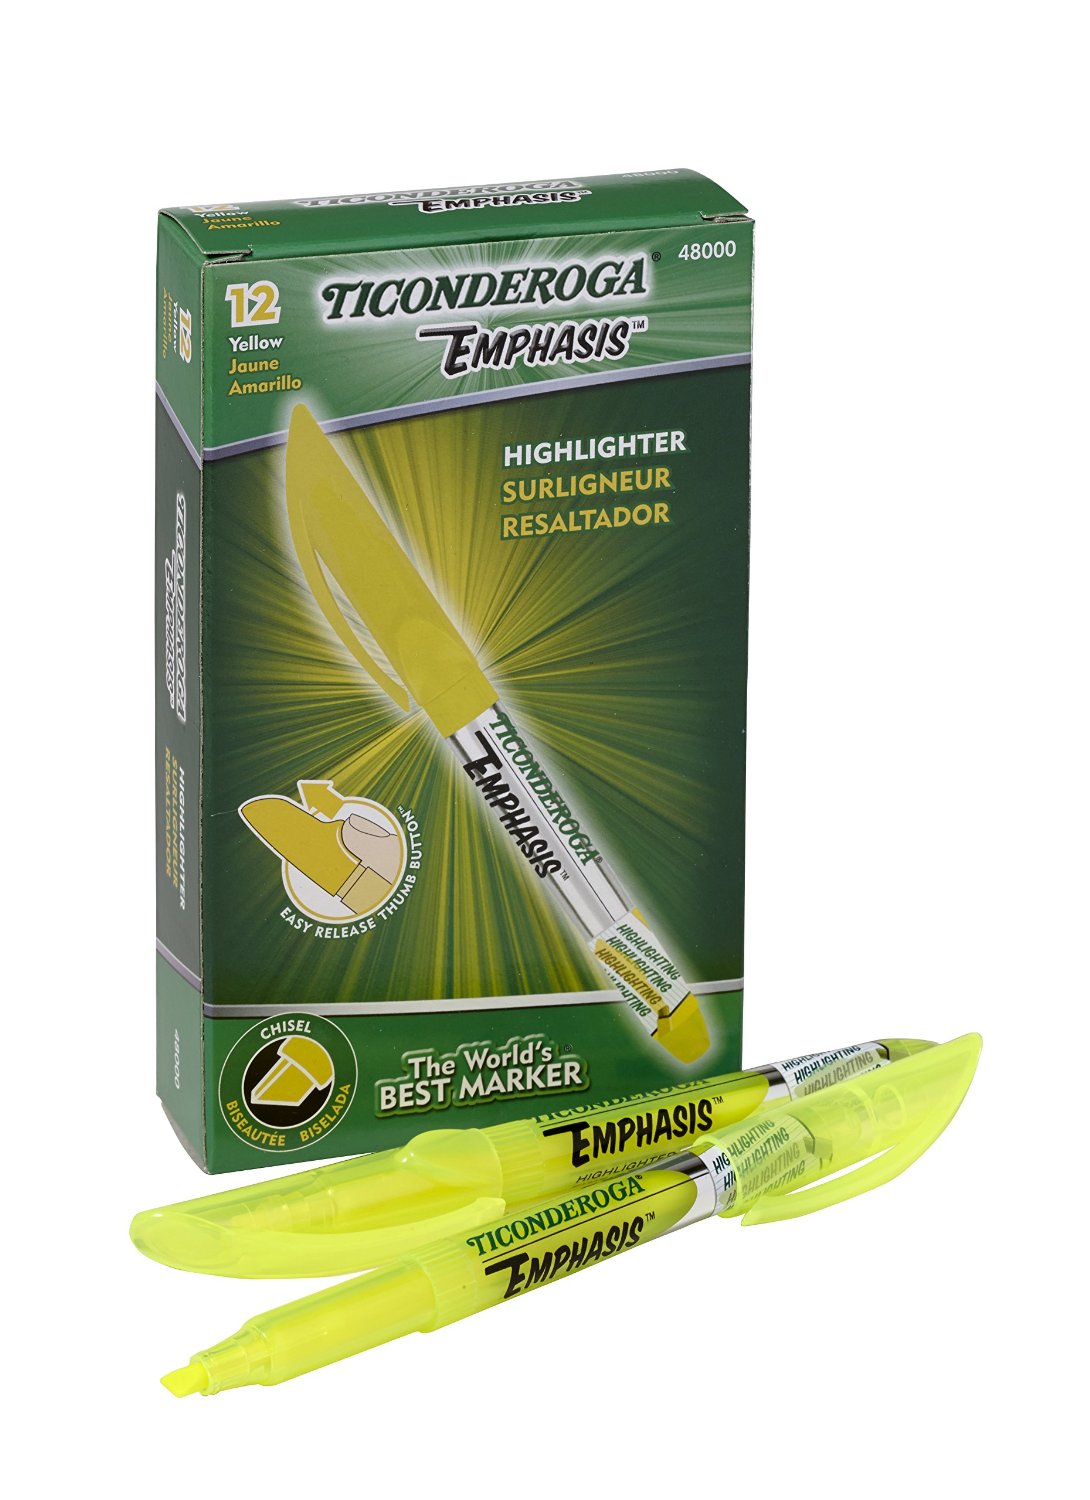 Ticonderoga Fluorescent Highlighters (Yellow) 12 Pack Only $3.01 Shipped!